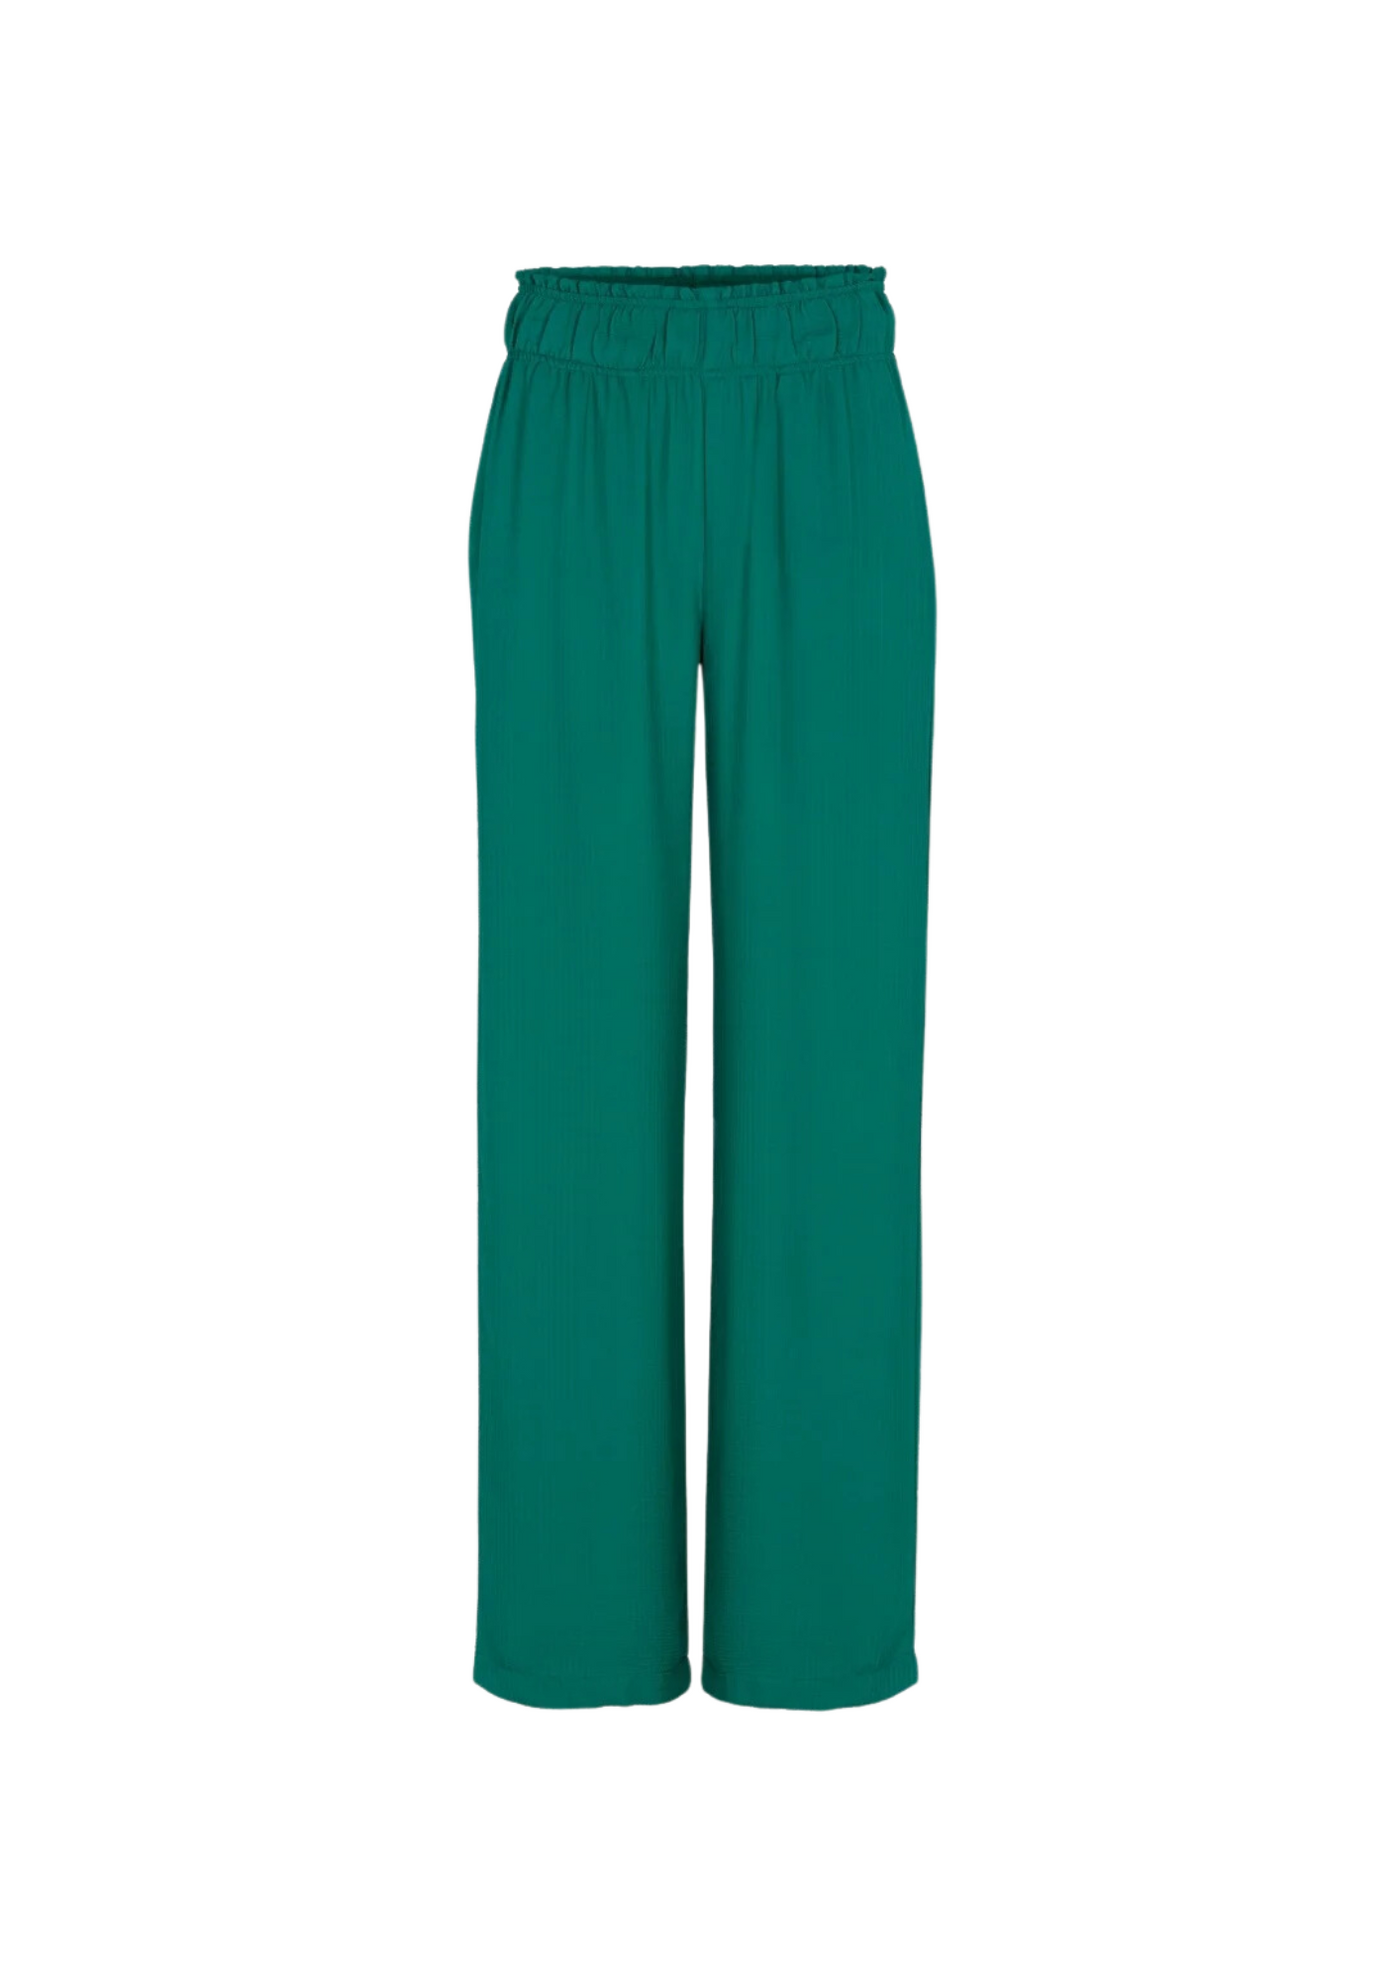 By Bar | Robyn Satin Pant Evergreen